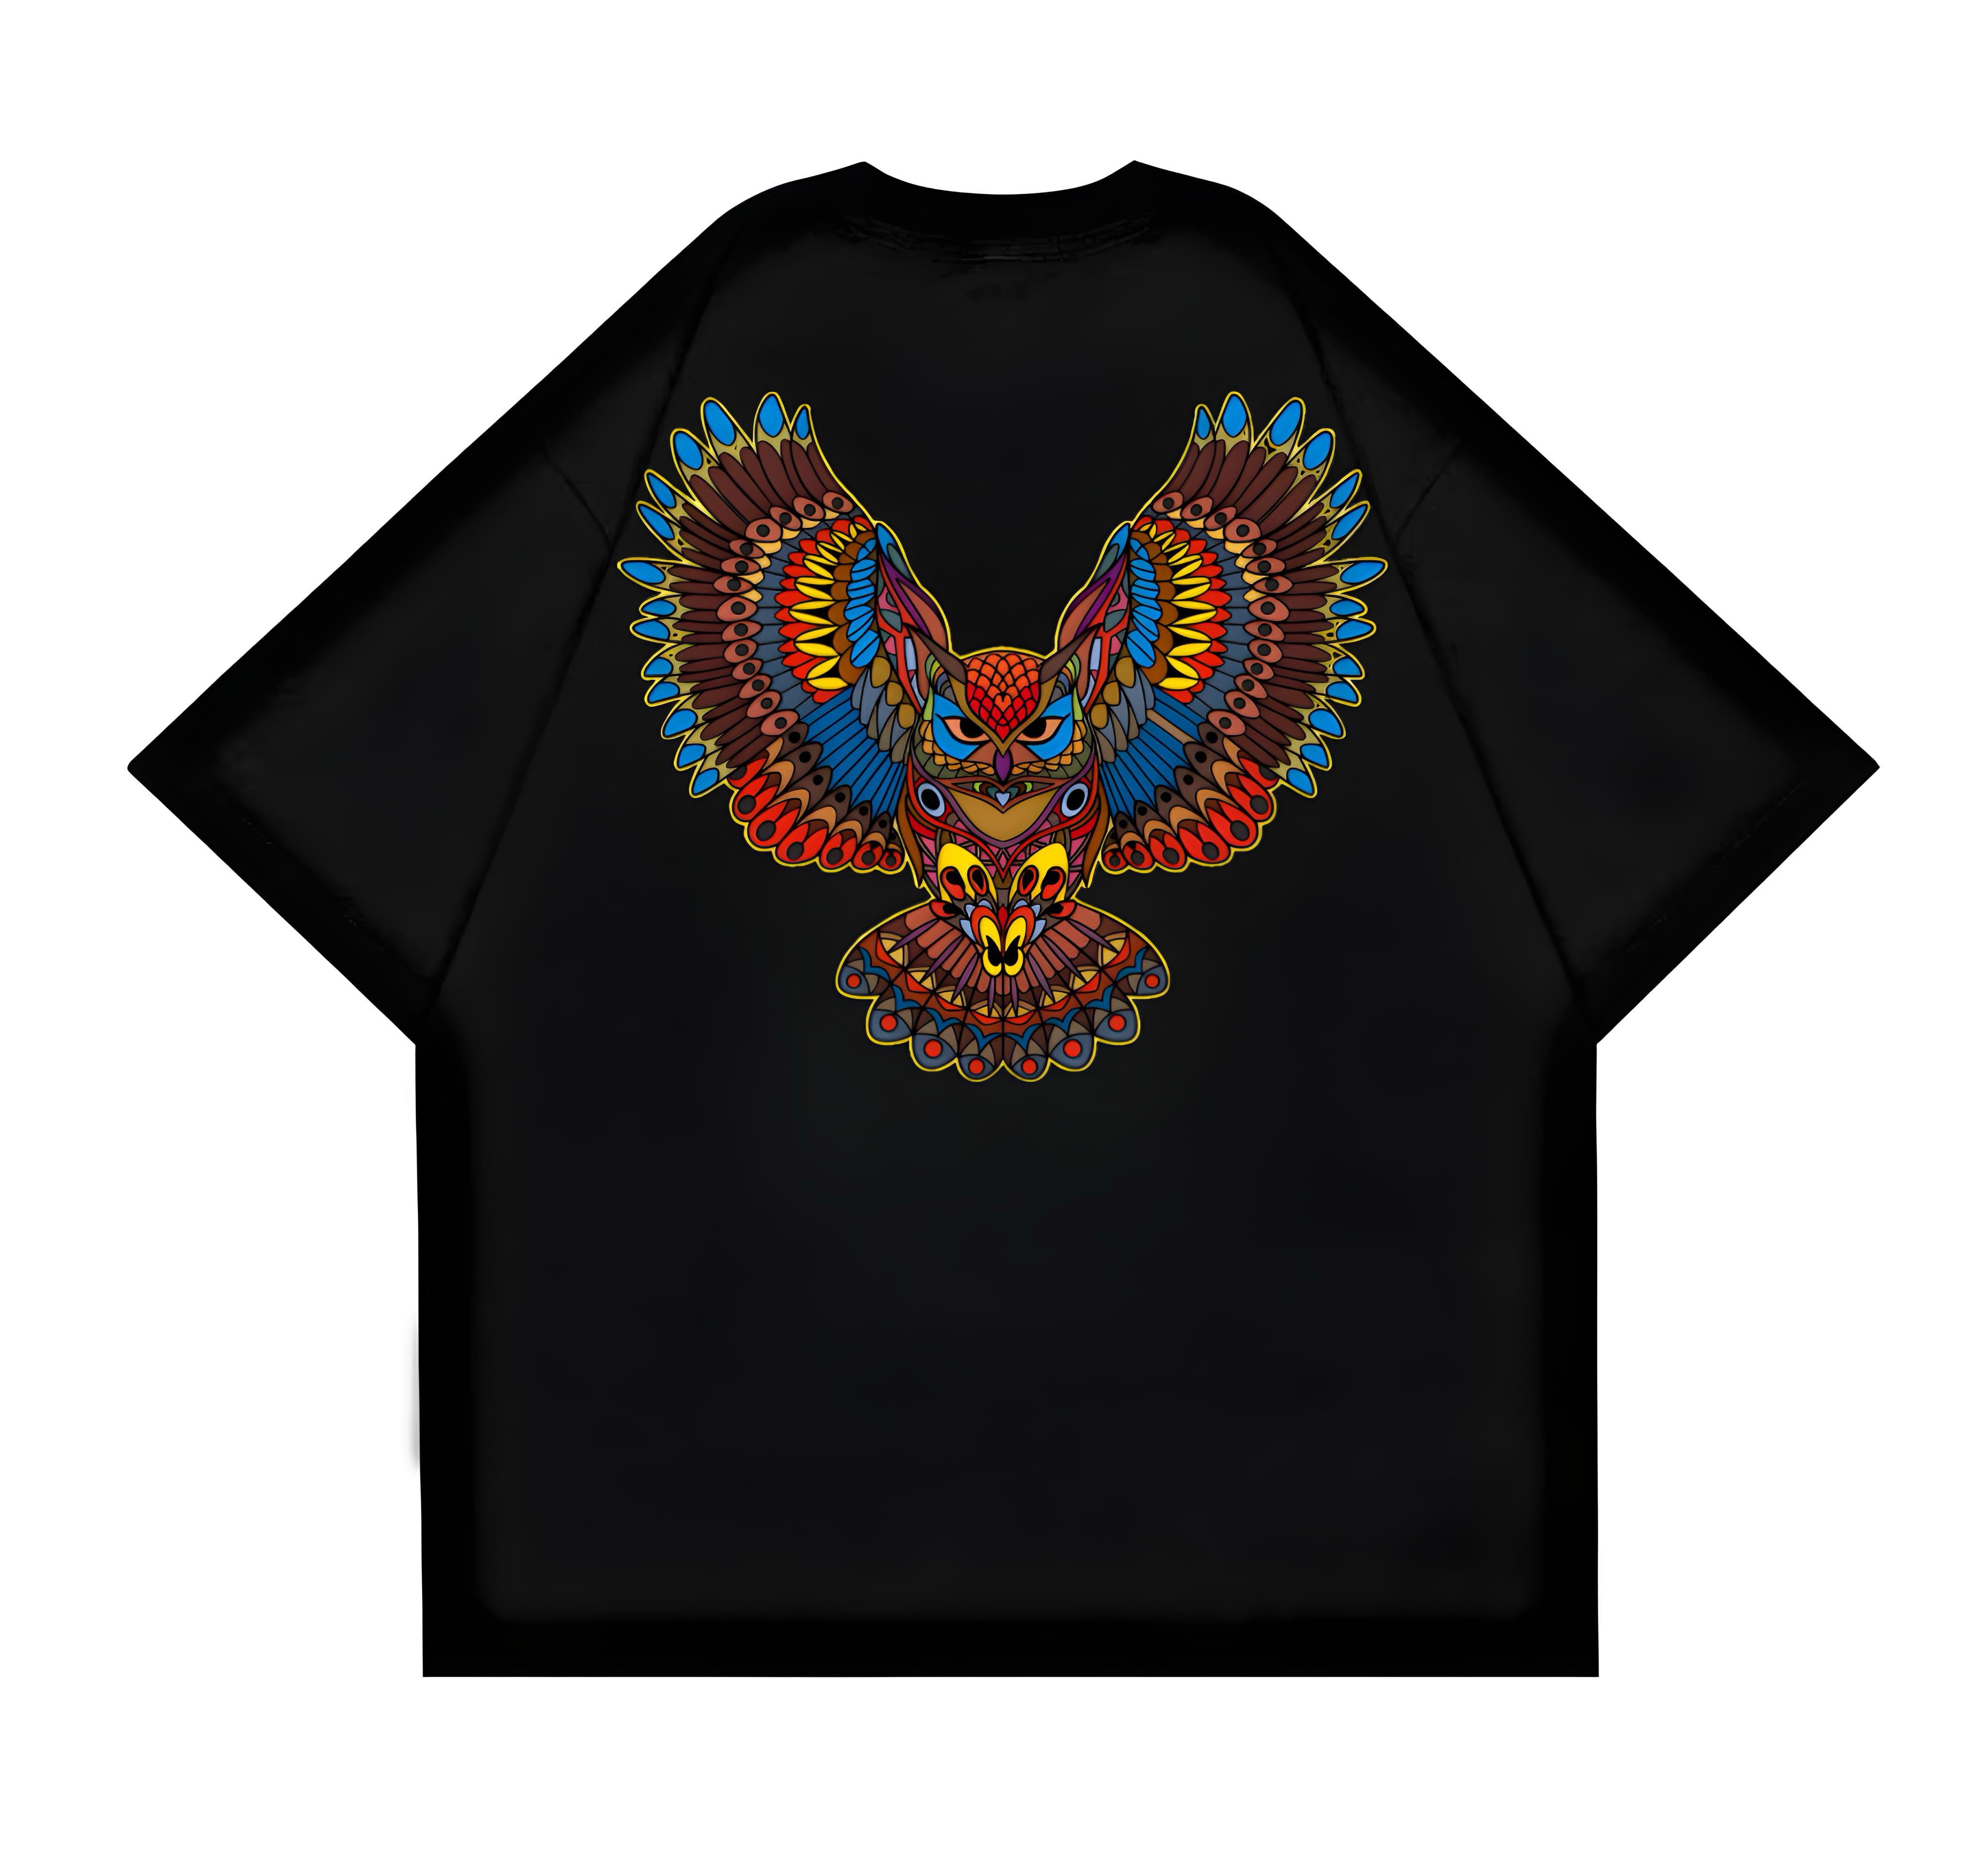 EXCLUSIVE EDITION 0.4 PSYCHEDELIC OWL